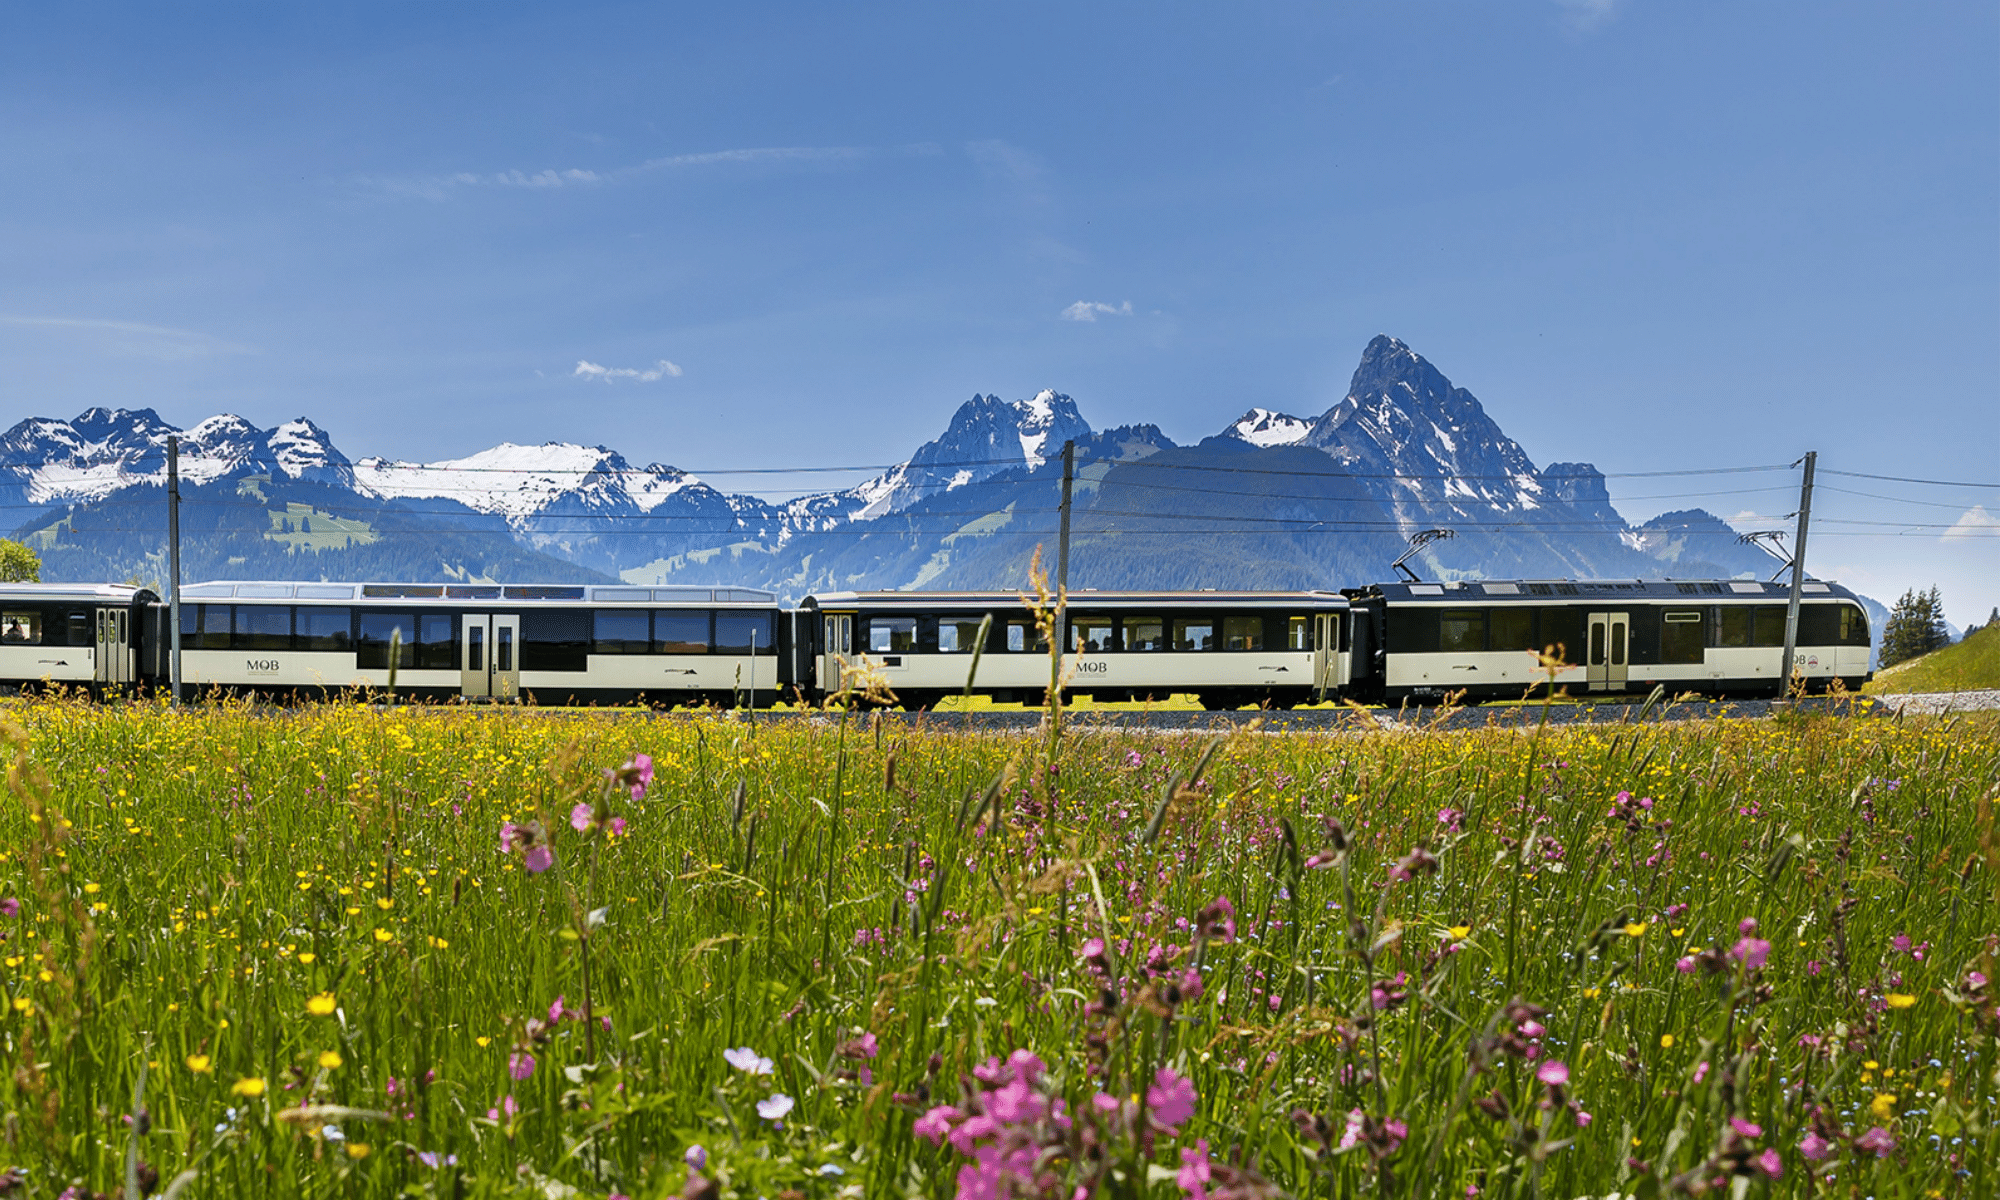 MOB Goldenpass Panoramic with snow-capped mountains - Spring - Saanen - MOB-Goldenpass